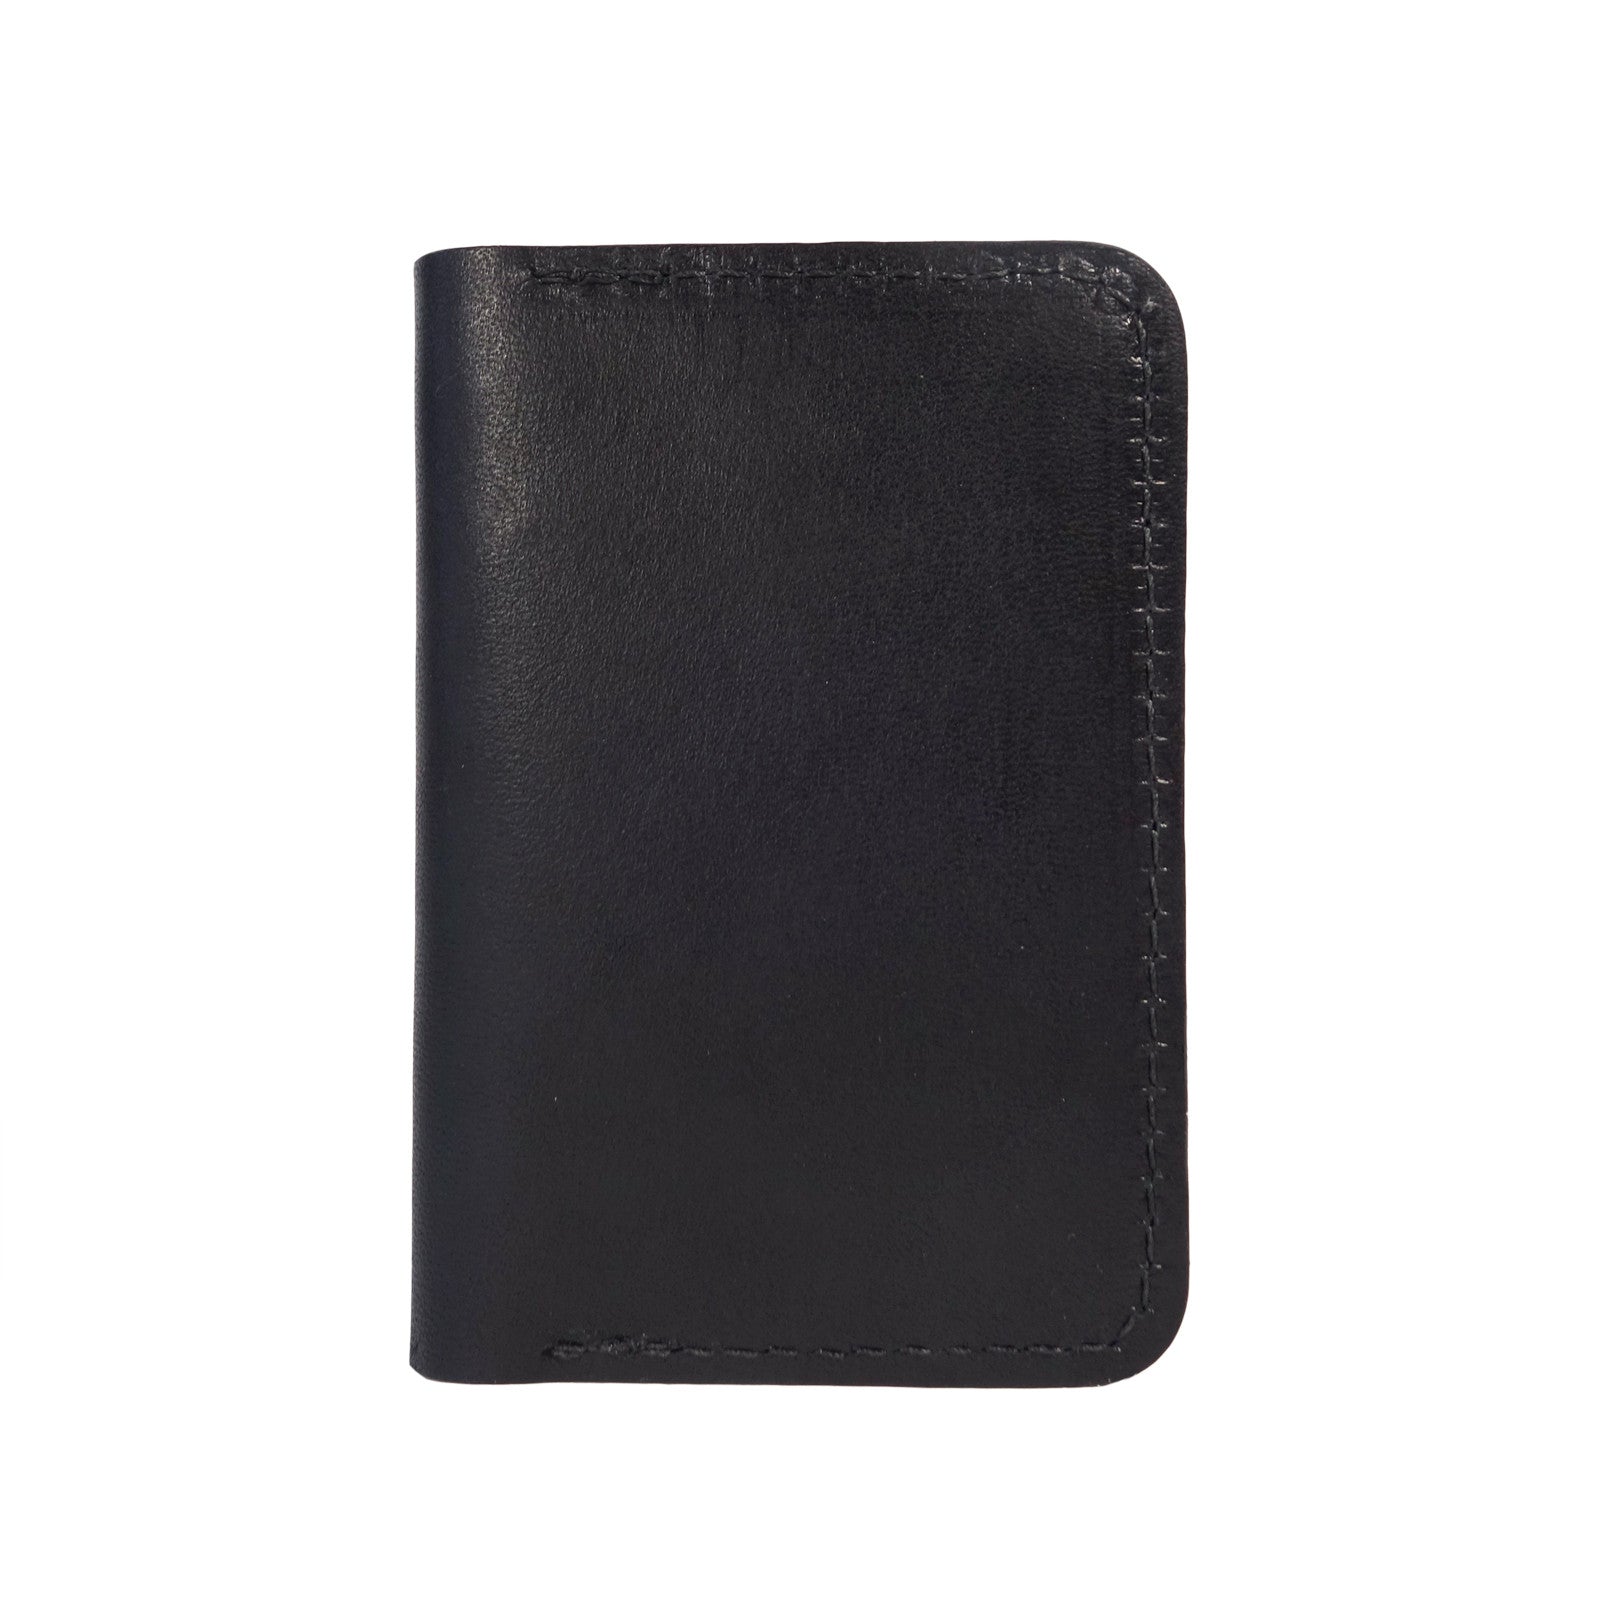 Frontside wallet. Card wallet. slim card case. leather card wallet. For those who like to keep their wallets in their front pockets. Slim enough to comfortably carry and large enough to fit your essential cards and some cash.  3/4oz Herman Oak Vegetable-Tanned Leather 2 Card-Slots